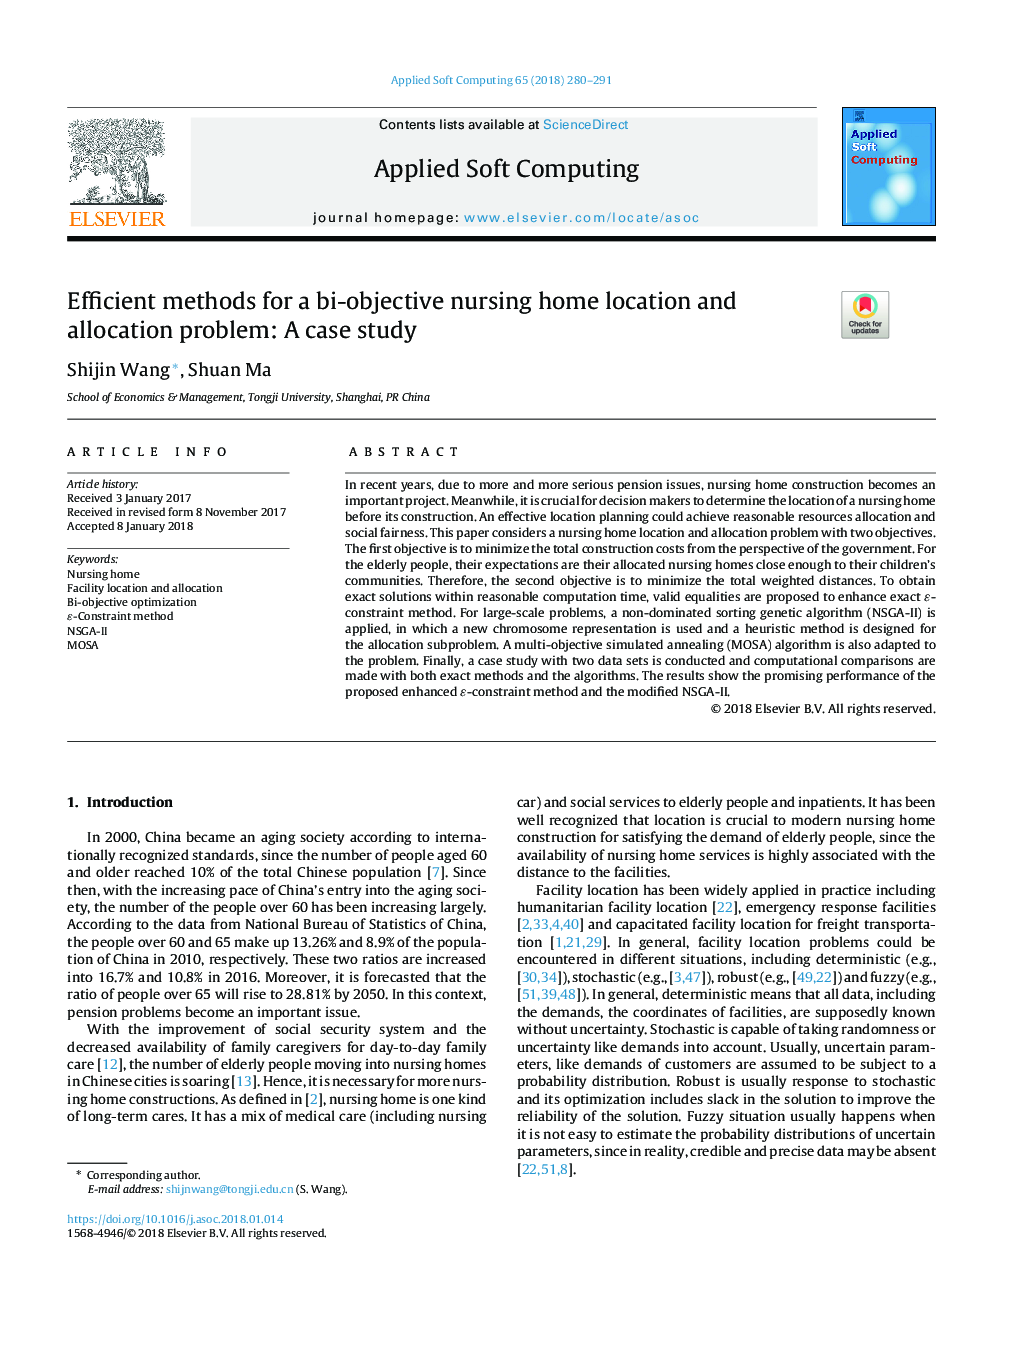 Efficient methods for a bi-objective nursing home location and allocation problem: A case study